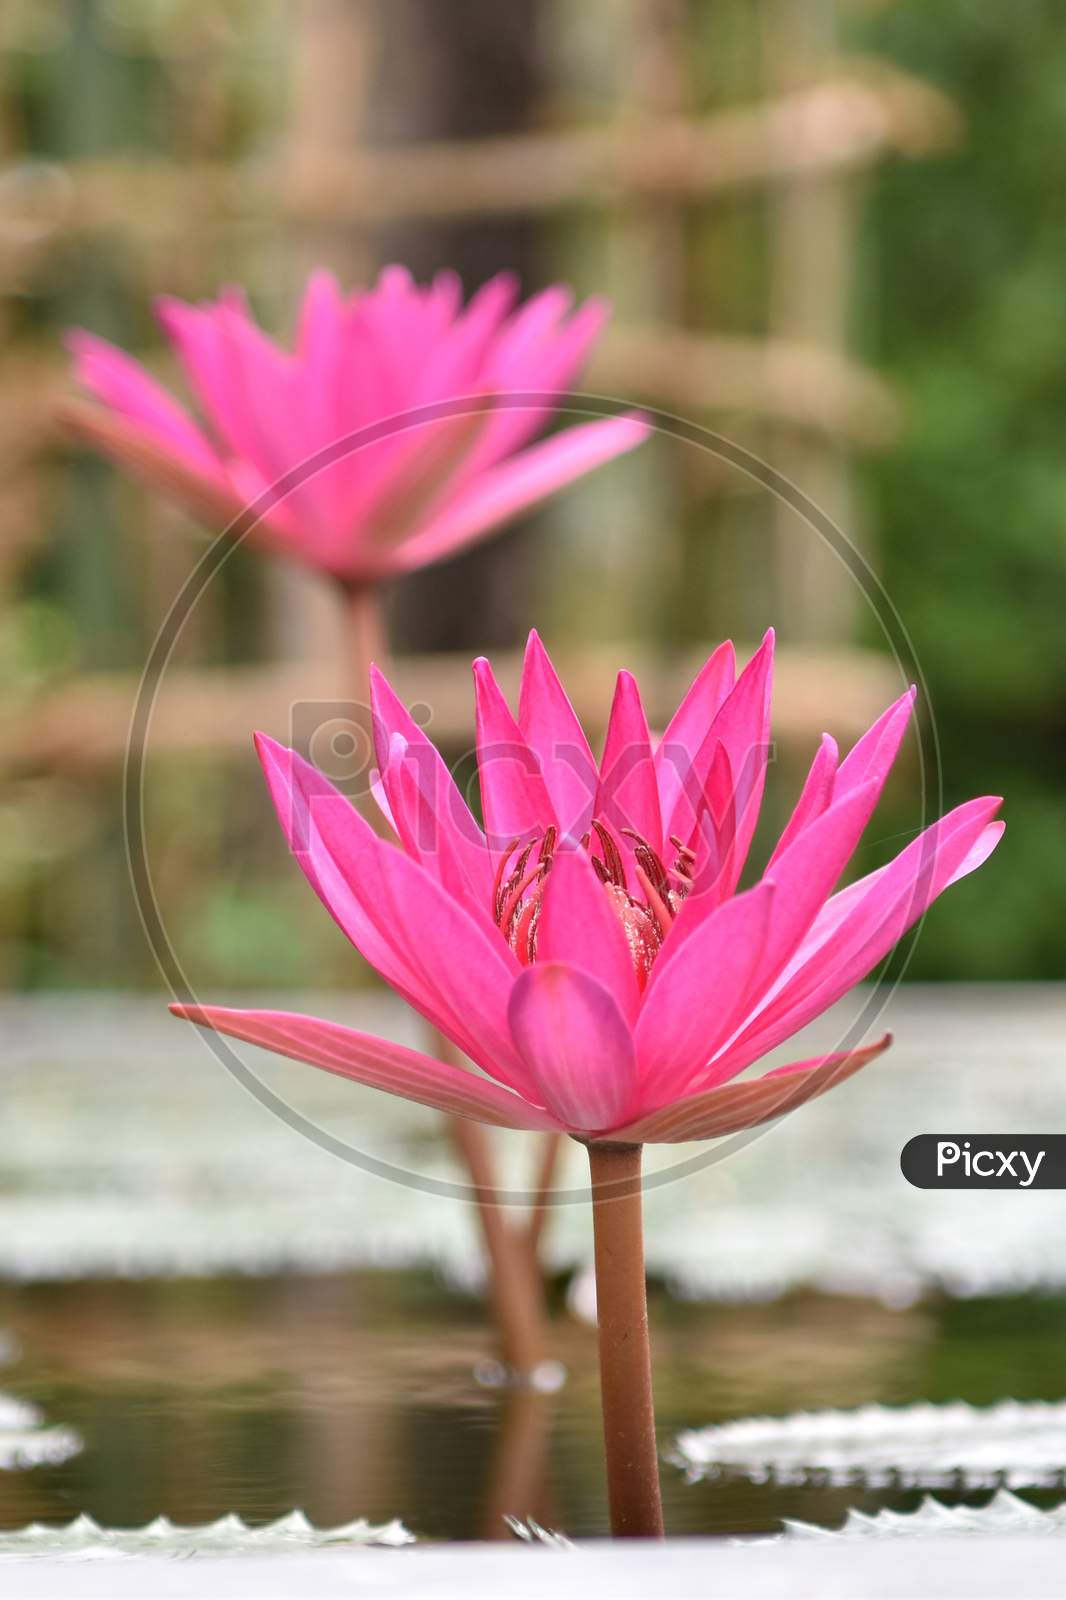 Closeup Picture Of Pink Lily Flower Blossom On Blue Water And Green Leaves Background, Beautiful Purple Waterlily In Bloom On Pond, One Lotus Flower Floating On Water Surface On Sunny Summer Day